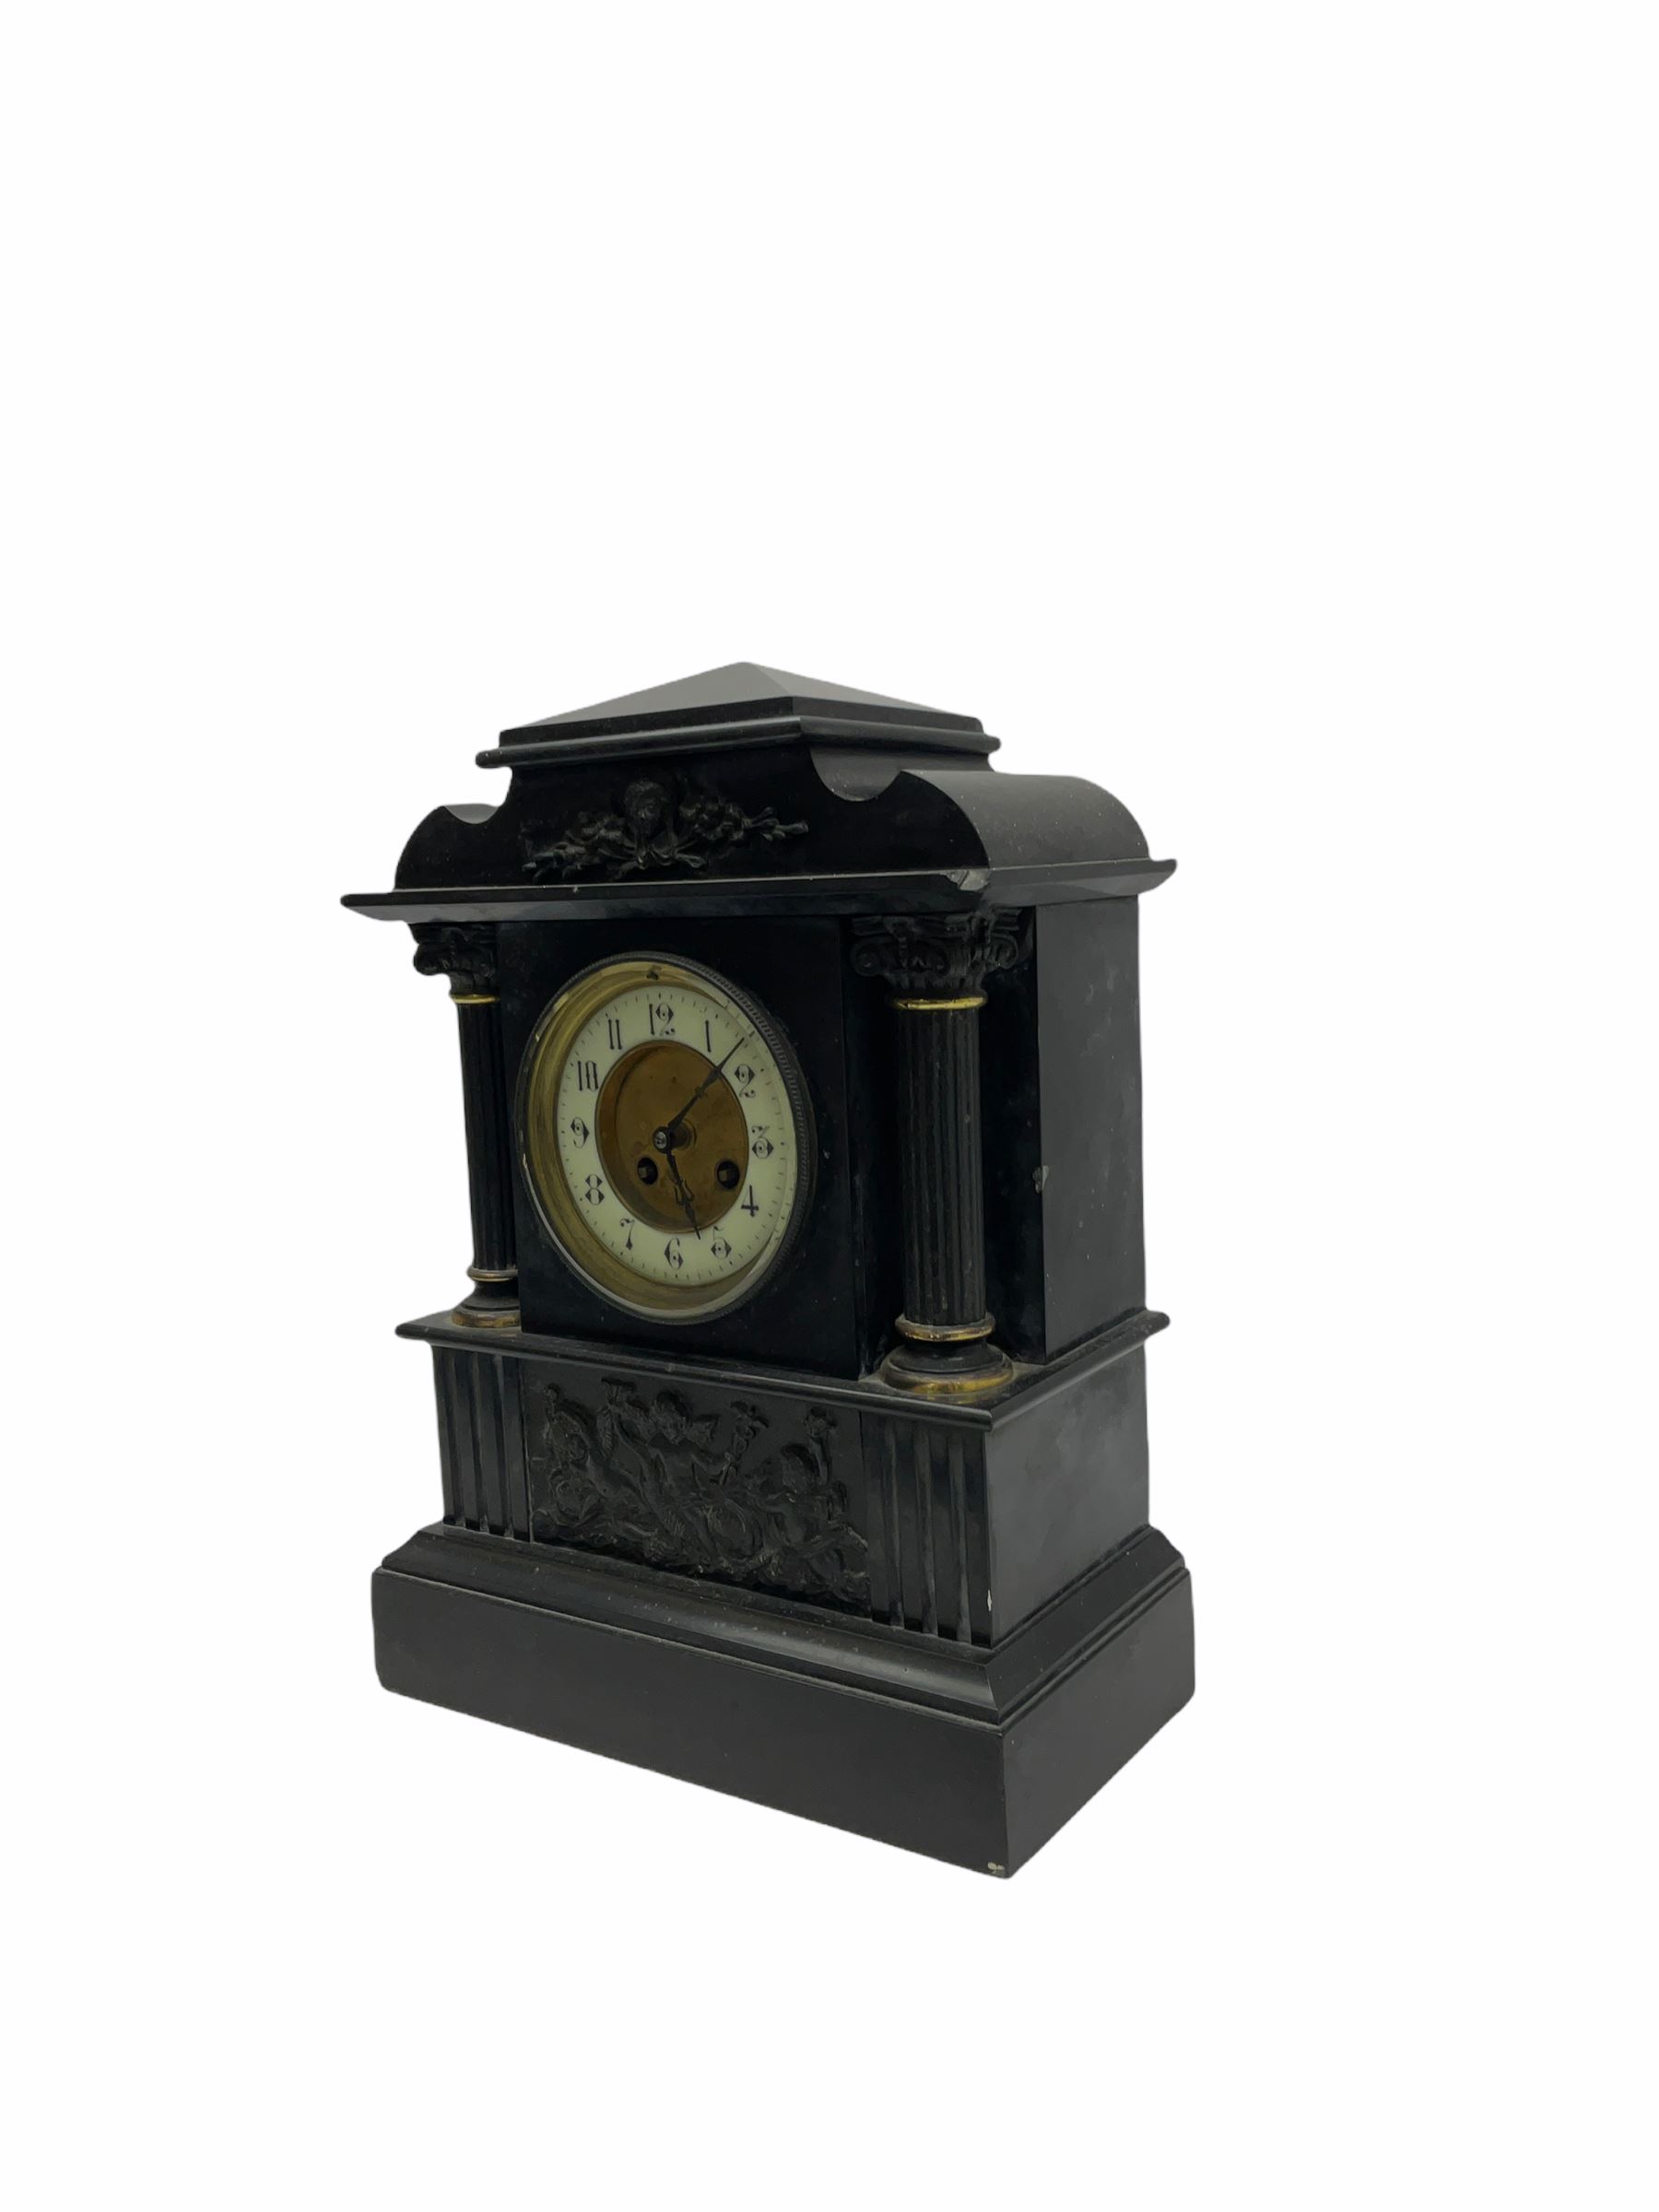 Late 19th century Belgium slate mantle clock with an eight-day French rack striking movement strikin - Image 2 of 3